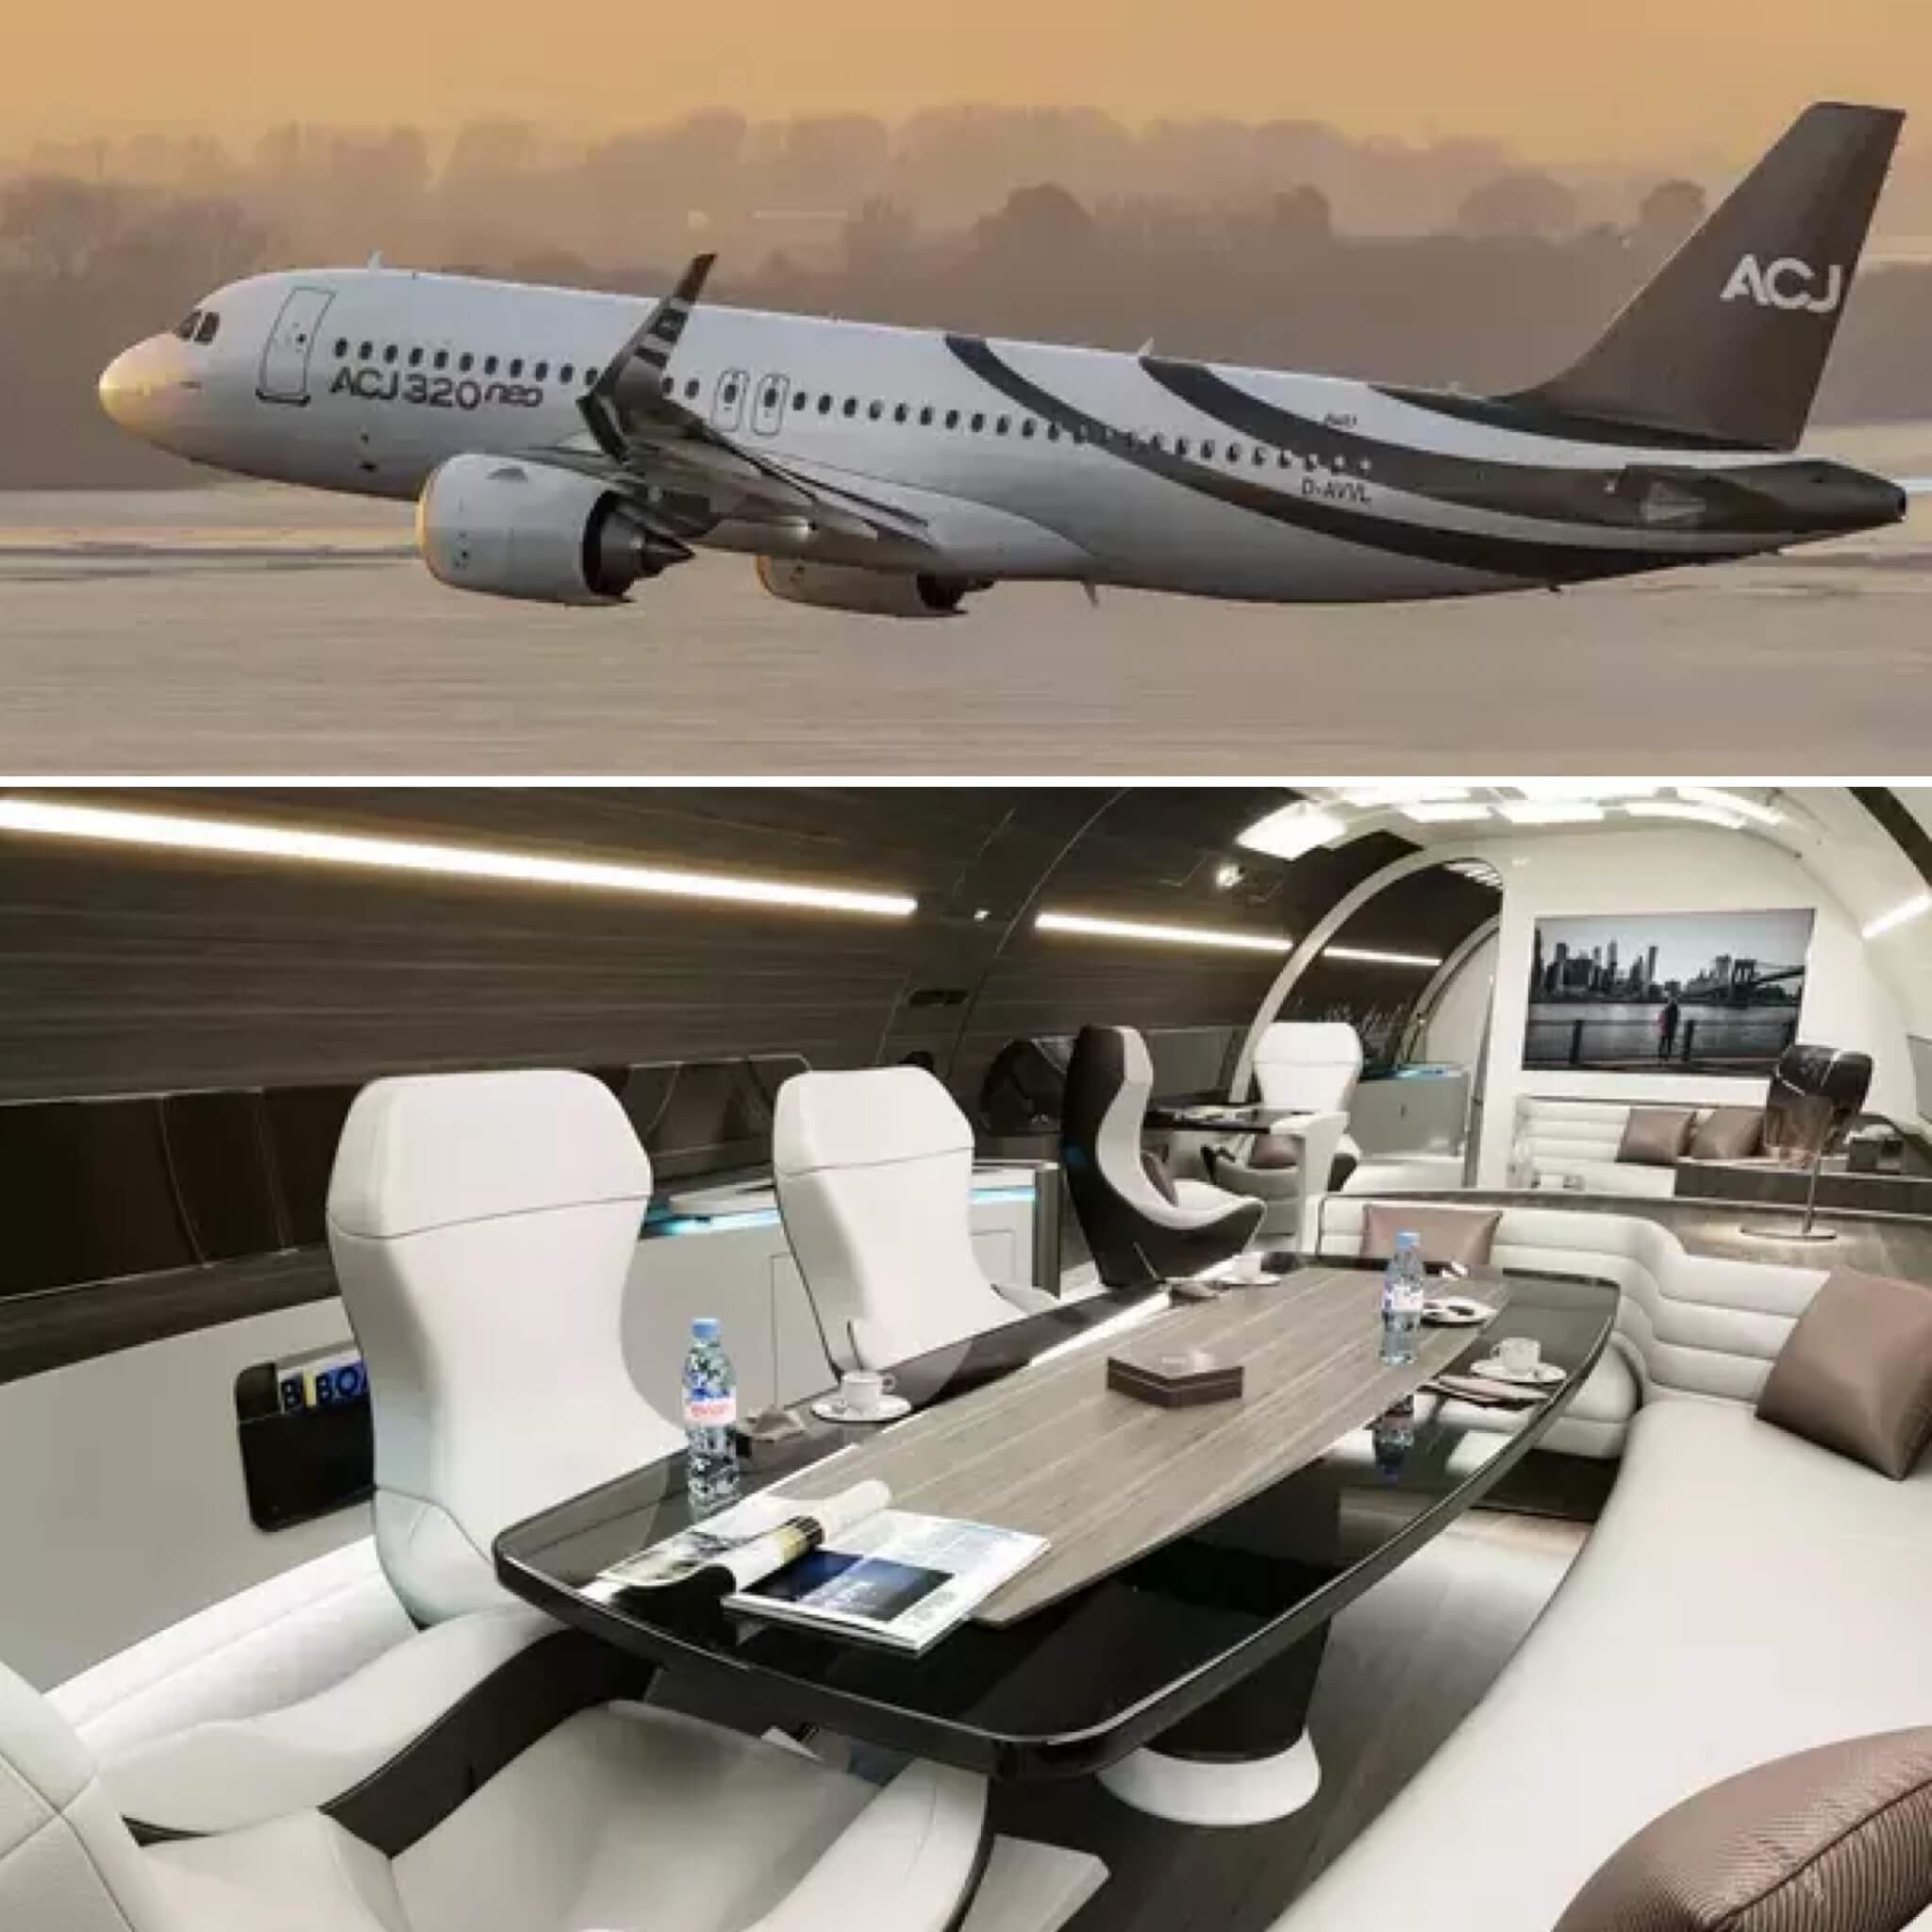 Inside the Airbus A320 ACJ private jet costing over $100 million new